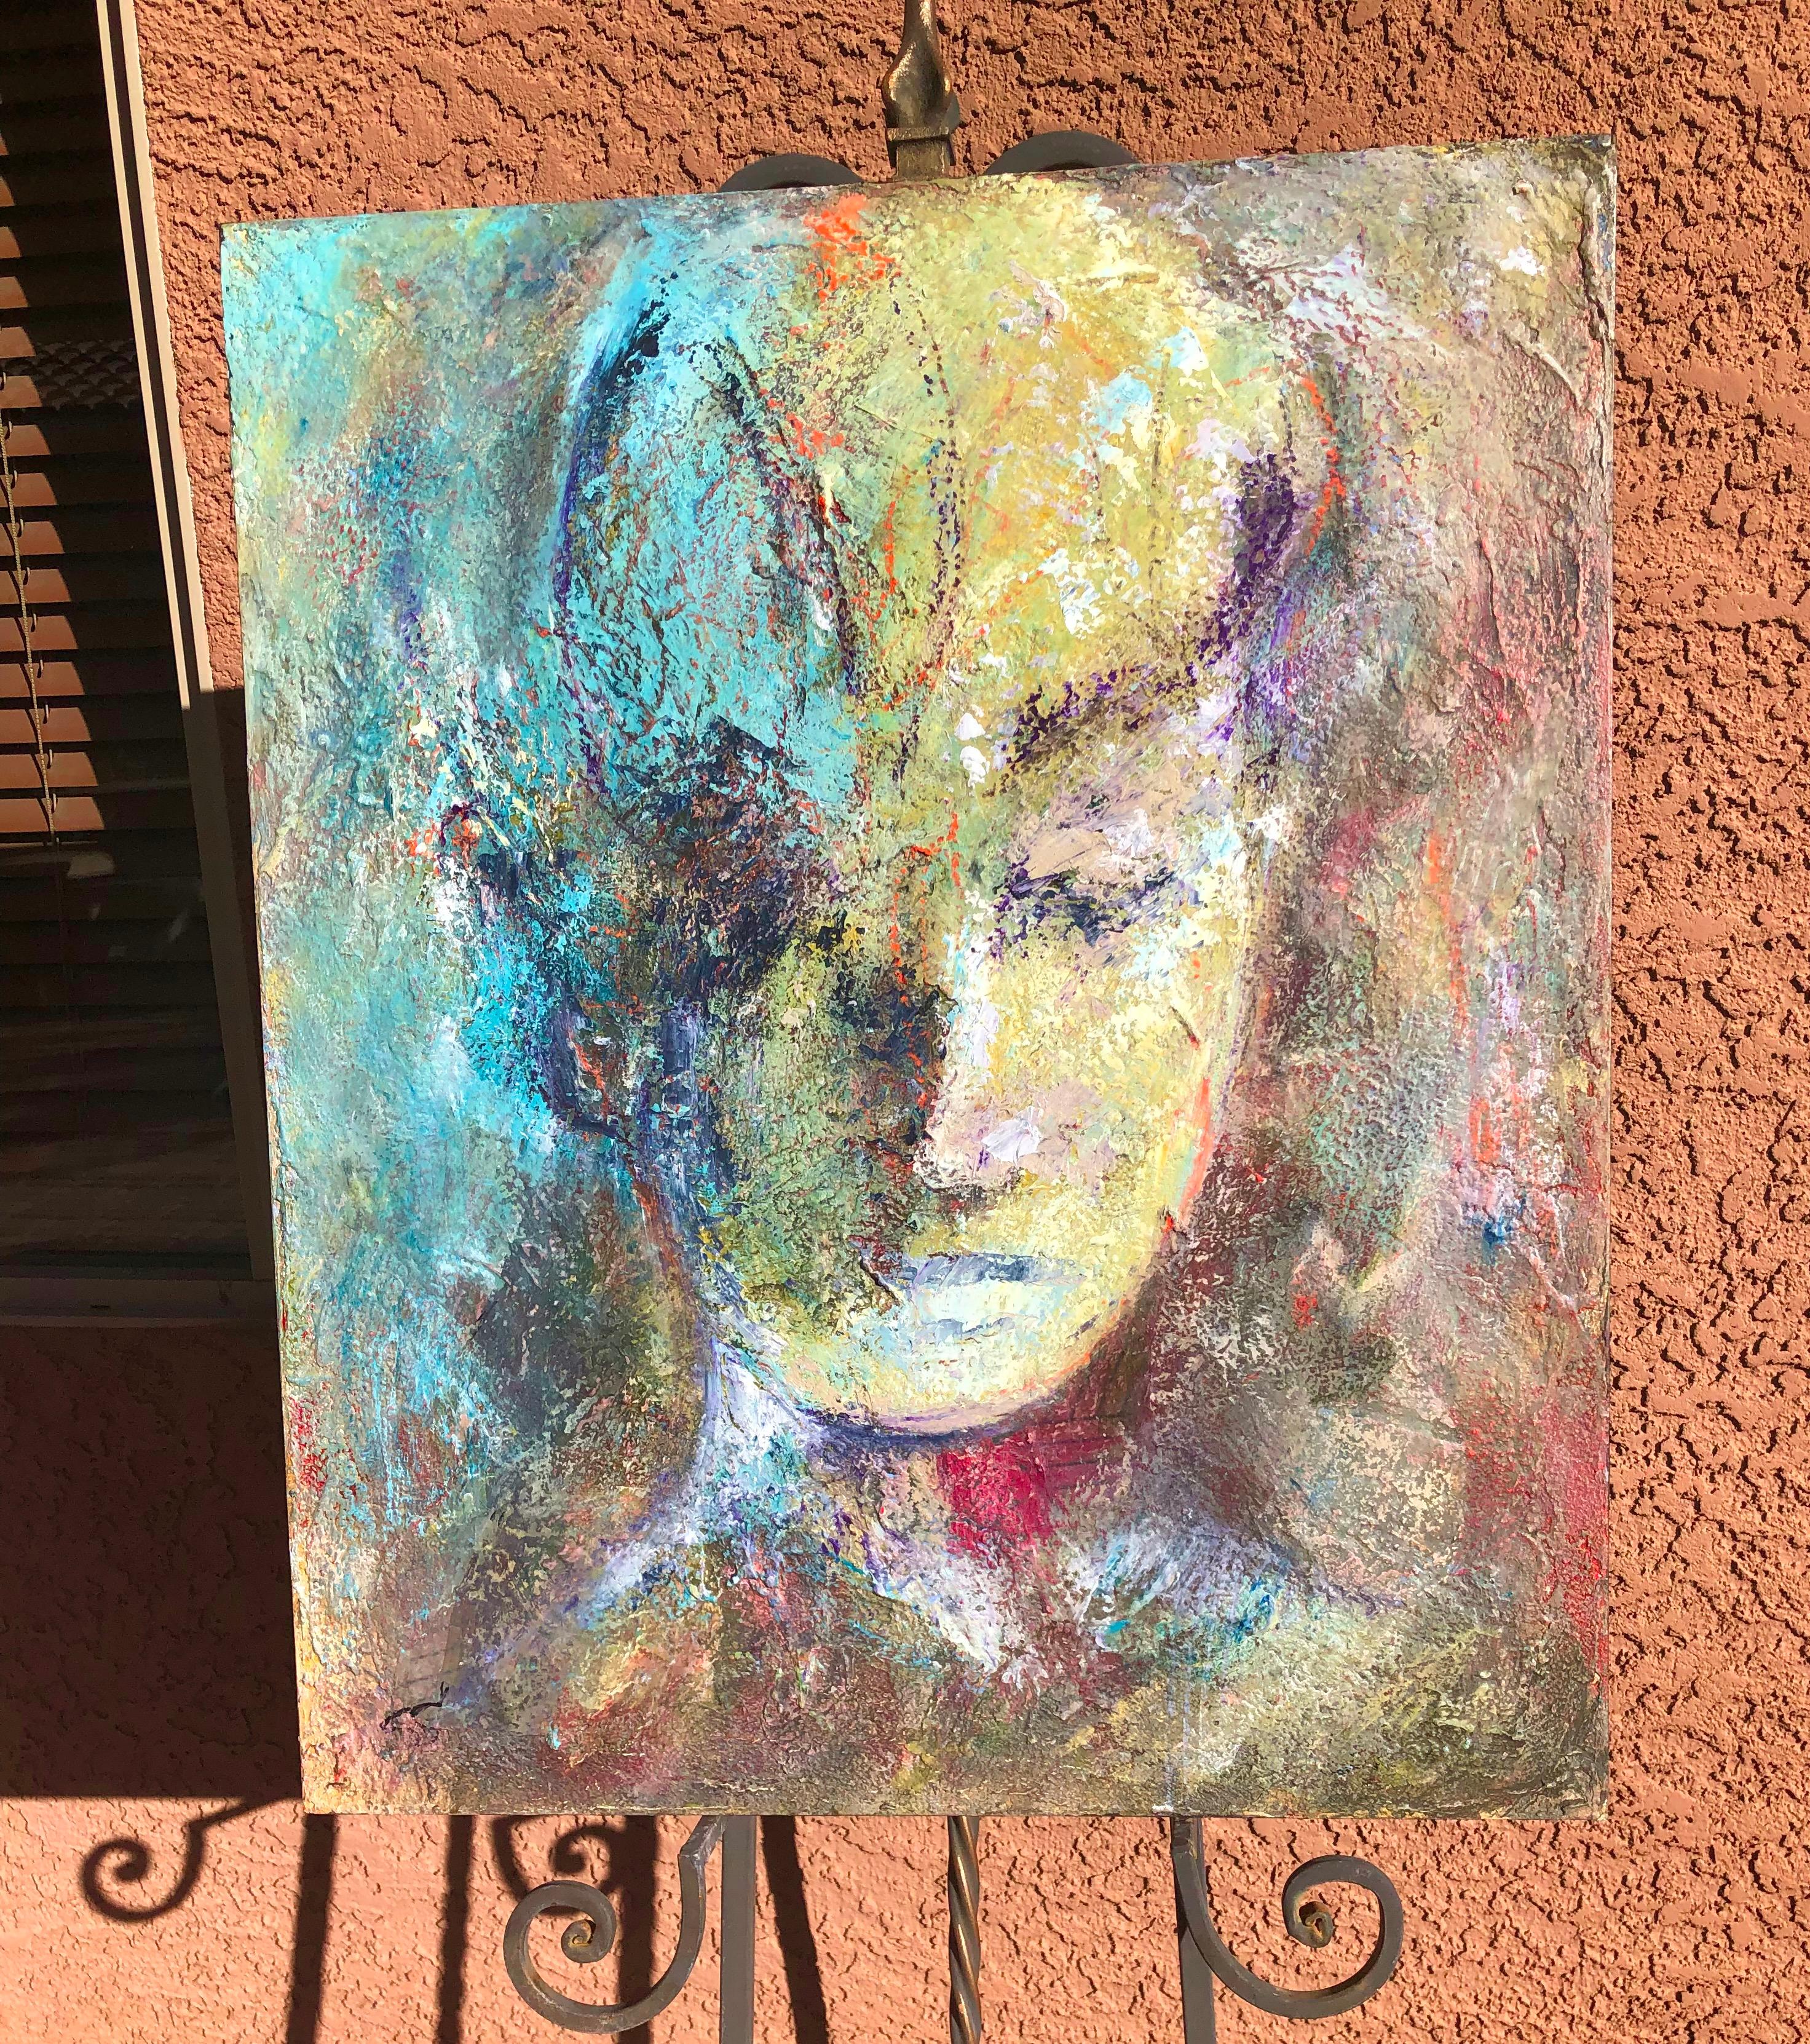 <p>Artist Comments<br>A face surfaces within the abstract expression of artist Sharon Sieben's striking contemporary portrait. Cold wax mixed with oil constitutes a compelling image of her model in a meditative state. Sharon reminds us that